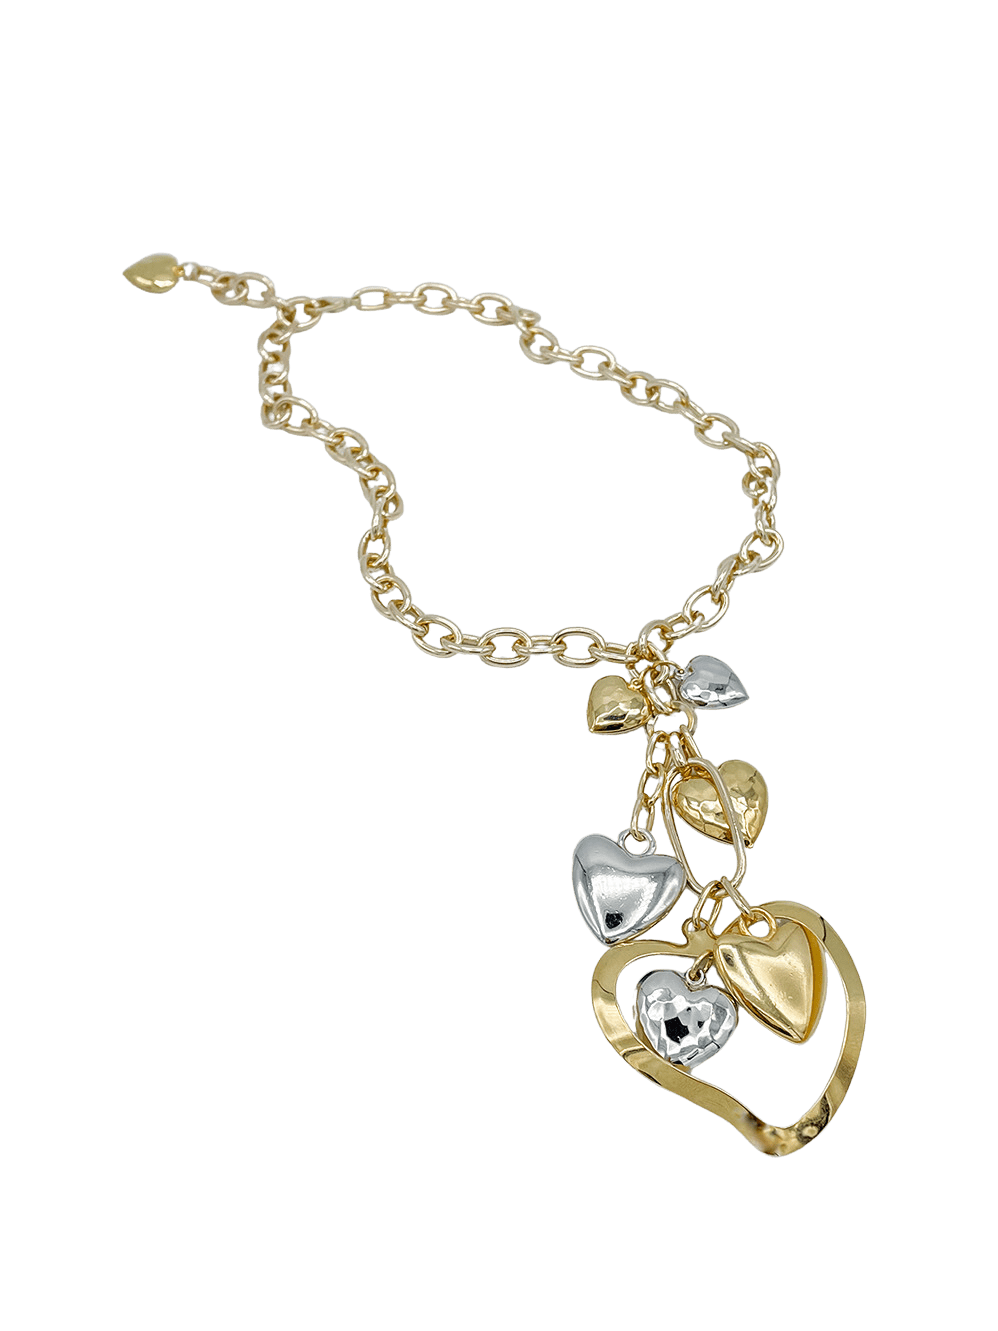 Necklace with Gold and Silver Heart Cascade